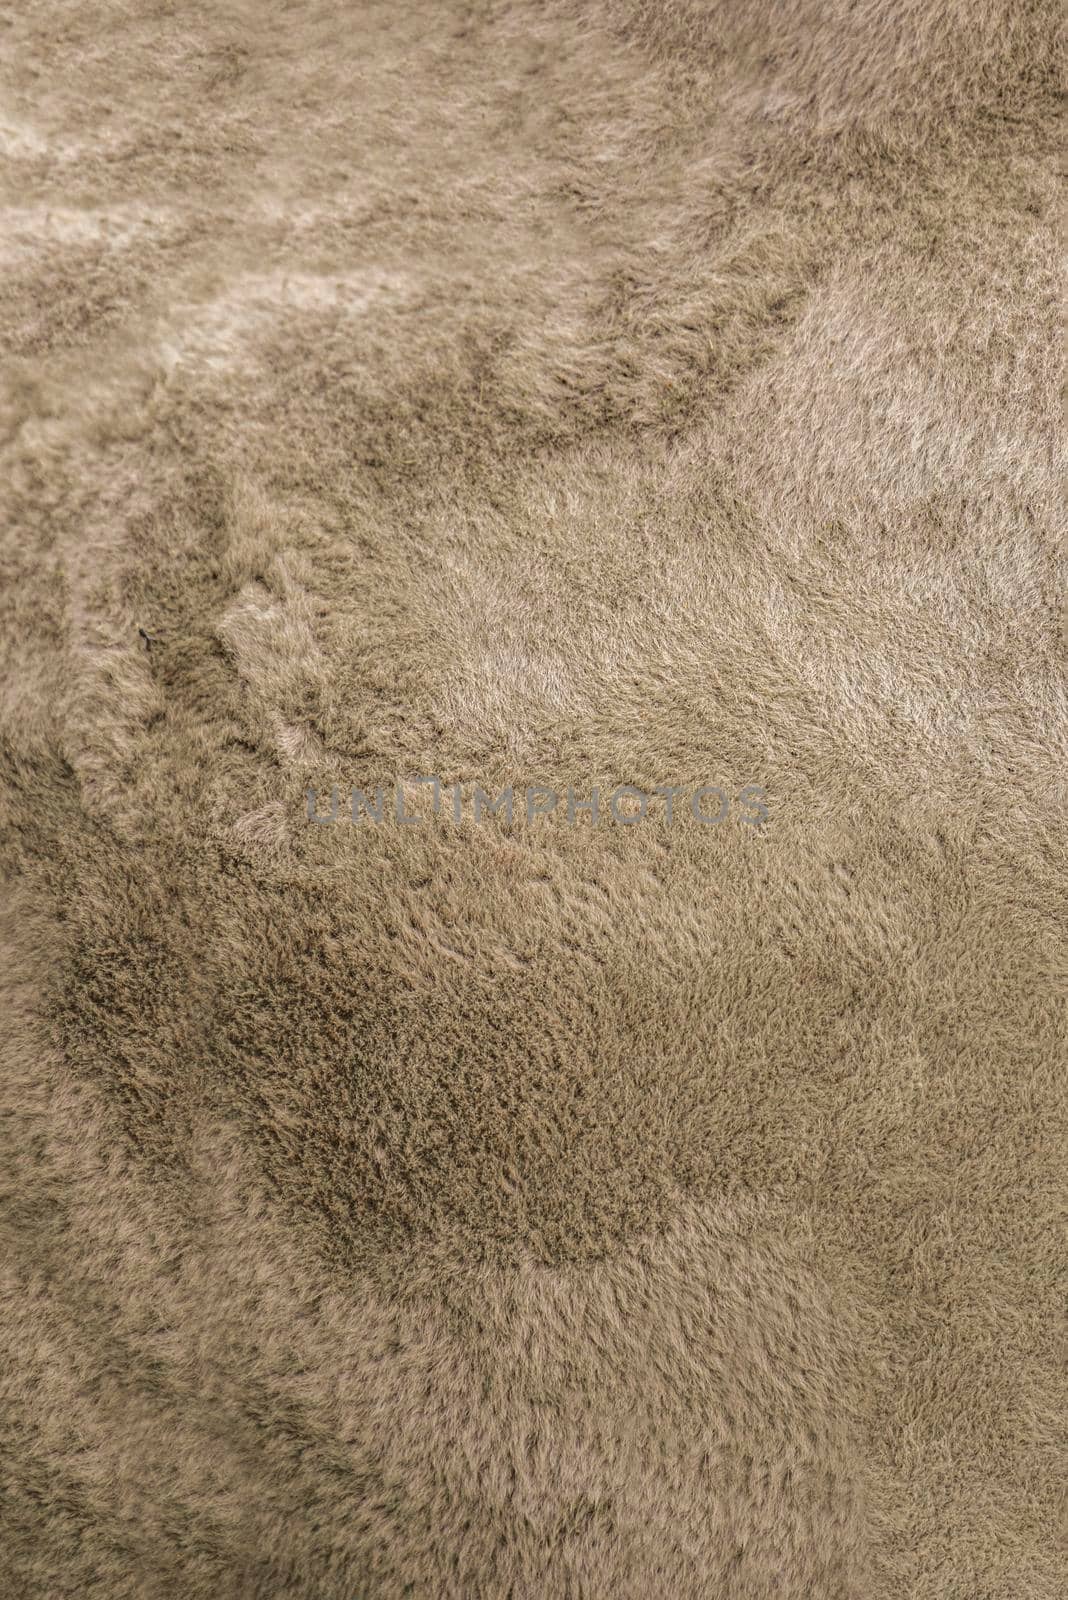 Camel texture. Camel skin close up. Camel wool for background or texture.